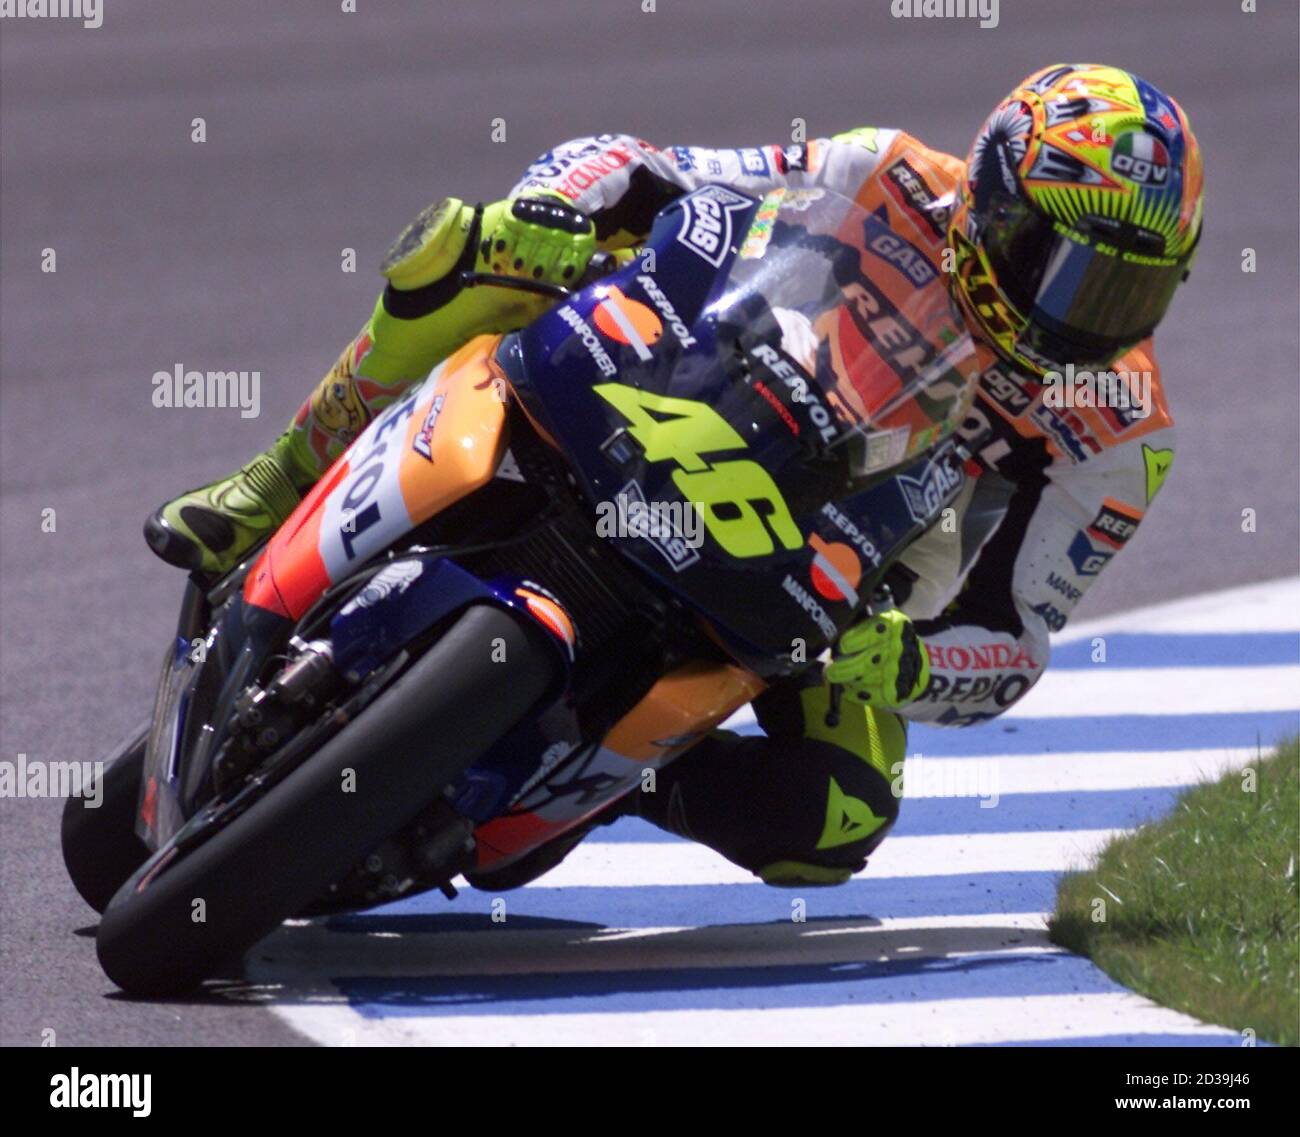 Italian MotoGP rider Valentino Rossi, 2001 world champion in the  500cc-class, takes a curve during the first training session ahead of the  Motorcycling Grand Prix at Jerez racetrack May 3, 2002. Rossi